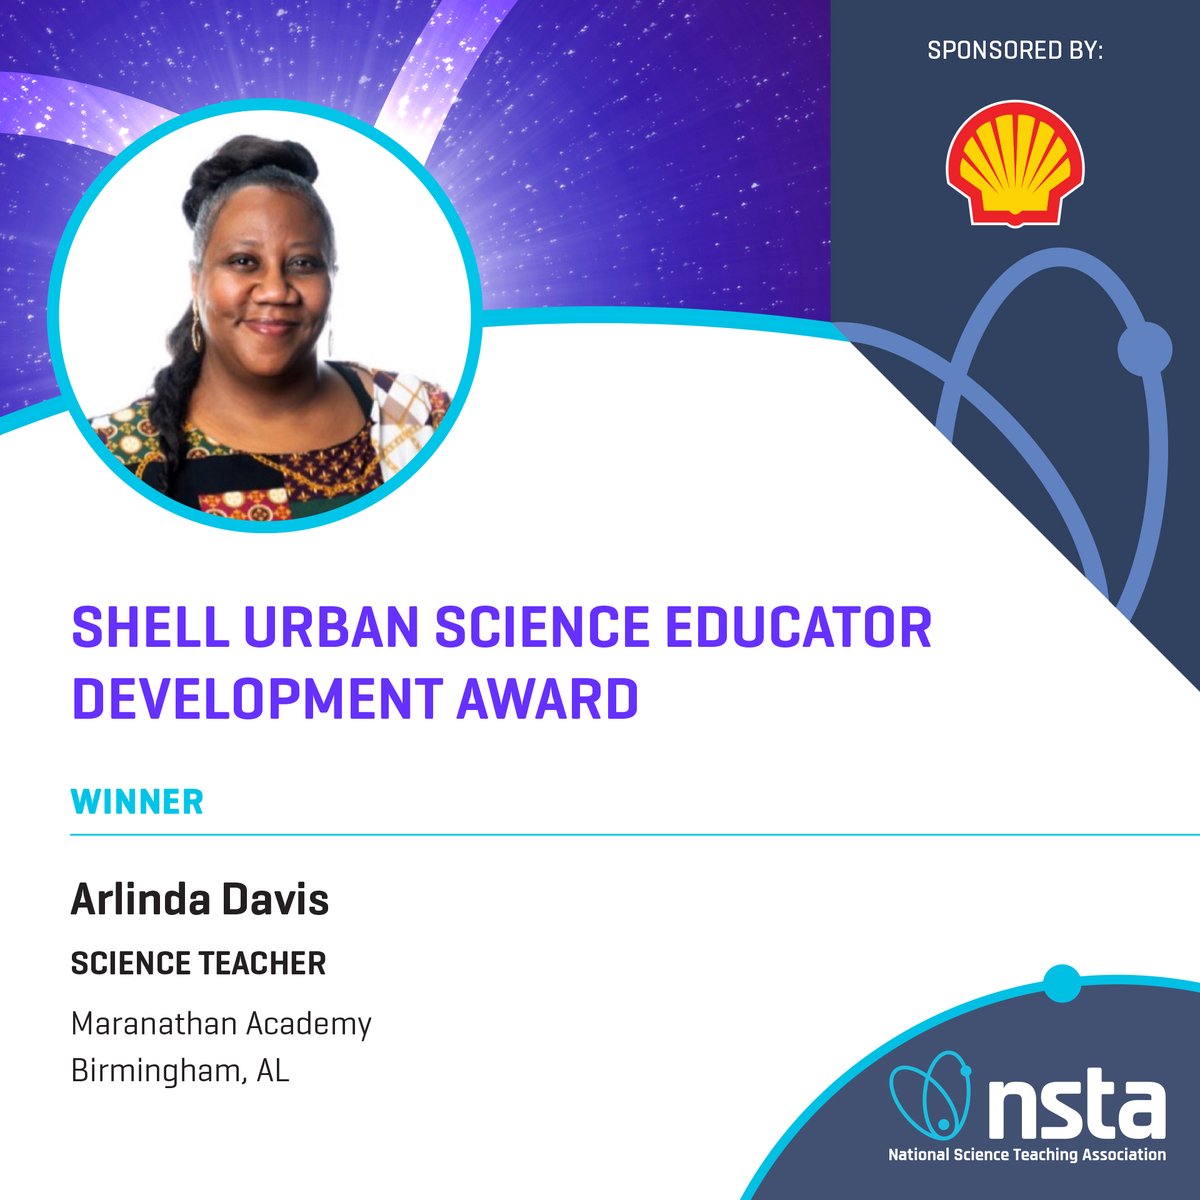 Join #NSTA in celebrating the Shell Urban Science Educator Development Award Winners! The award celebrates diverse educators in pursuit of professional development and serves to increase the science educator talent pool of minority educators. Congrats to all winners and nominees!